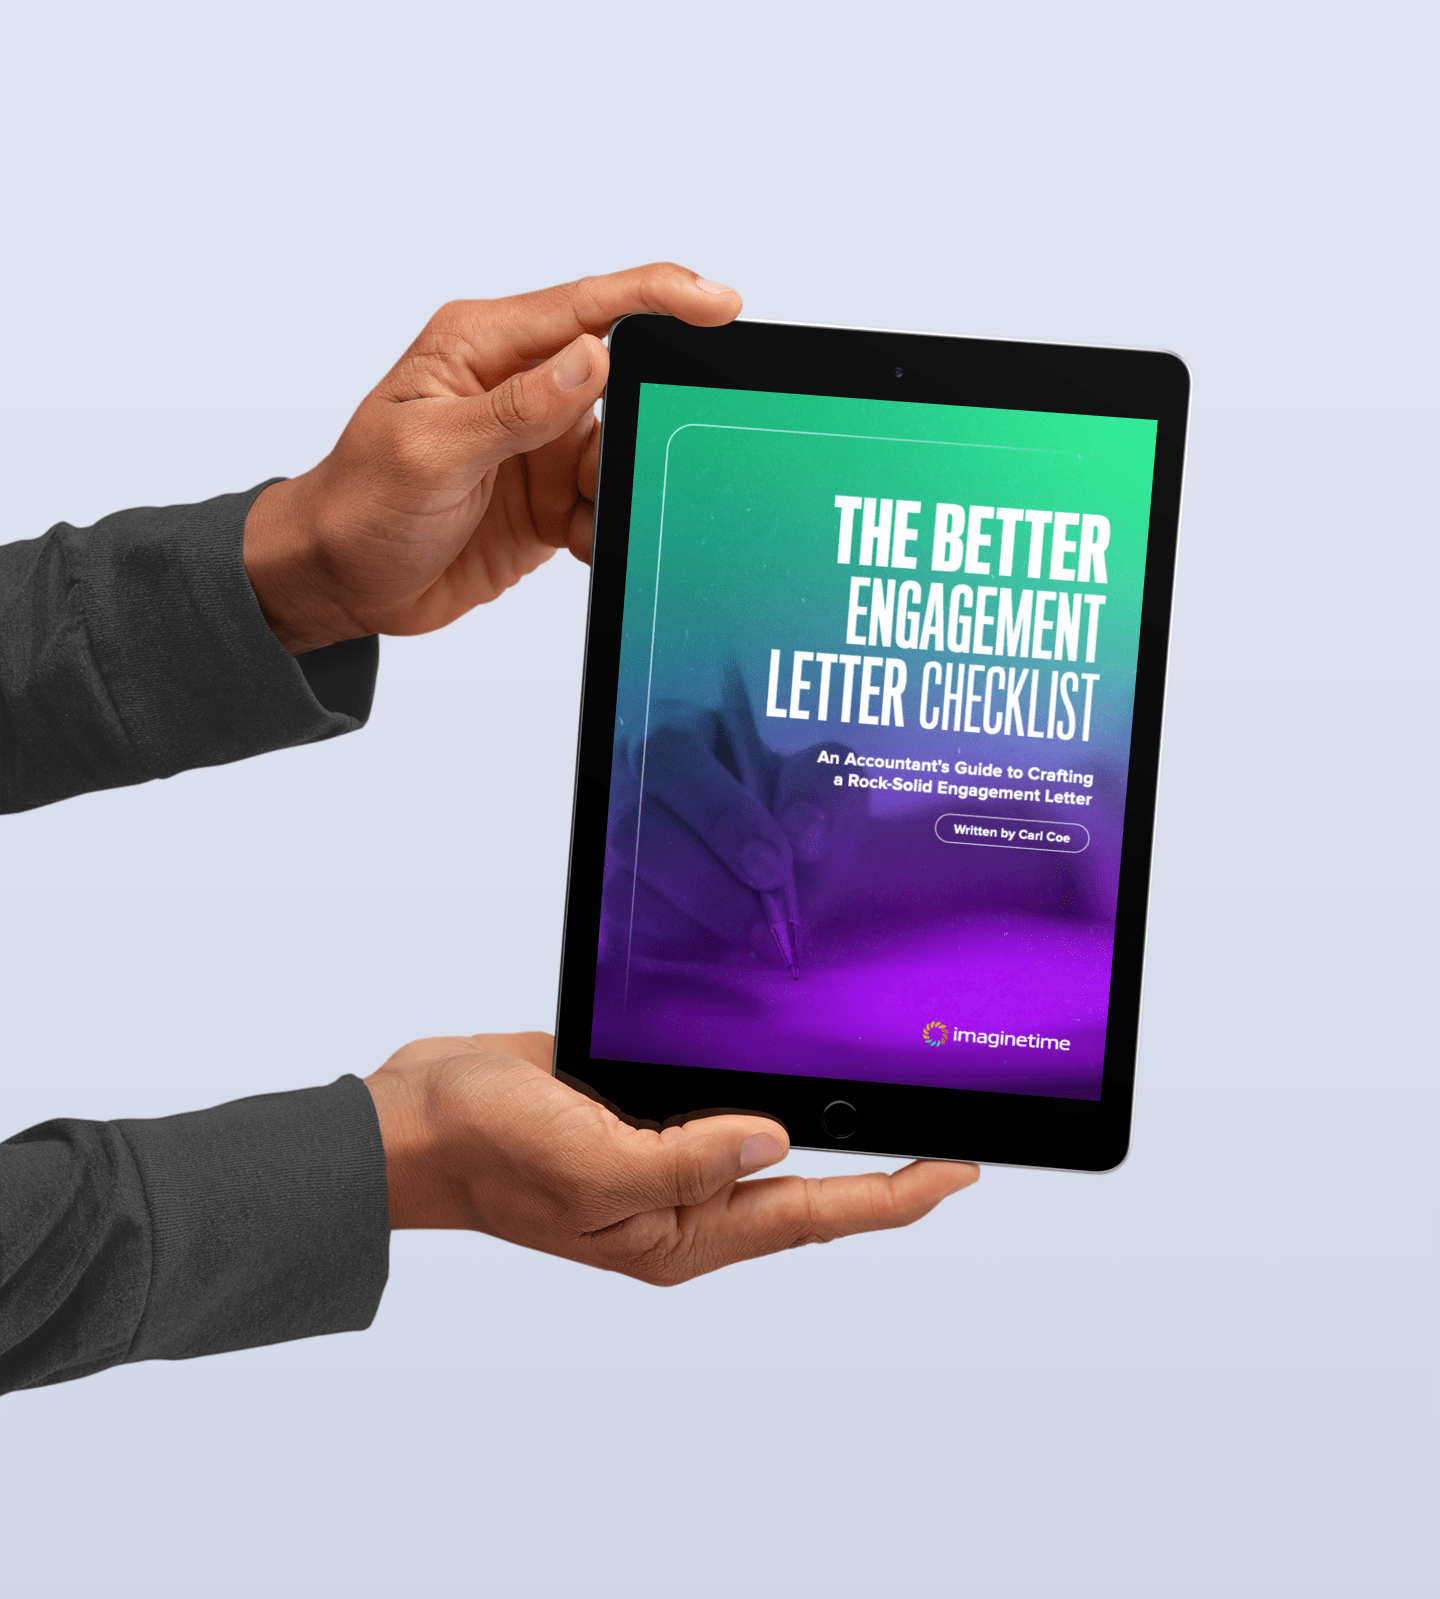 ipad-mockup-being-held-against-a-solid-color-background-22645-min-1